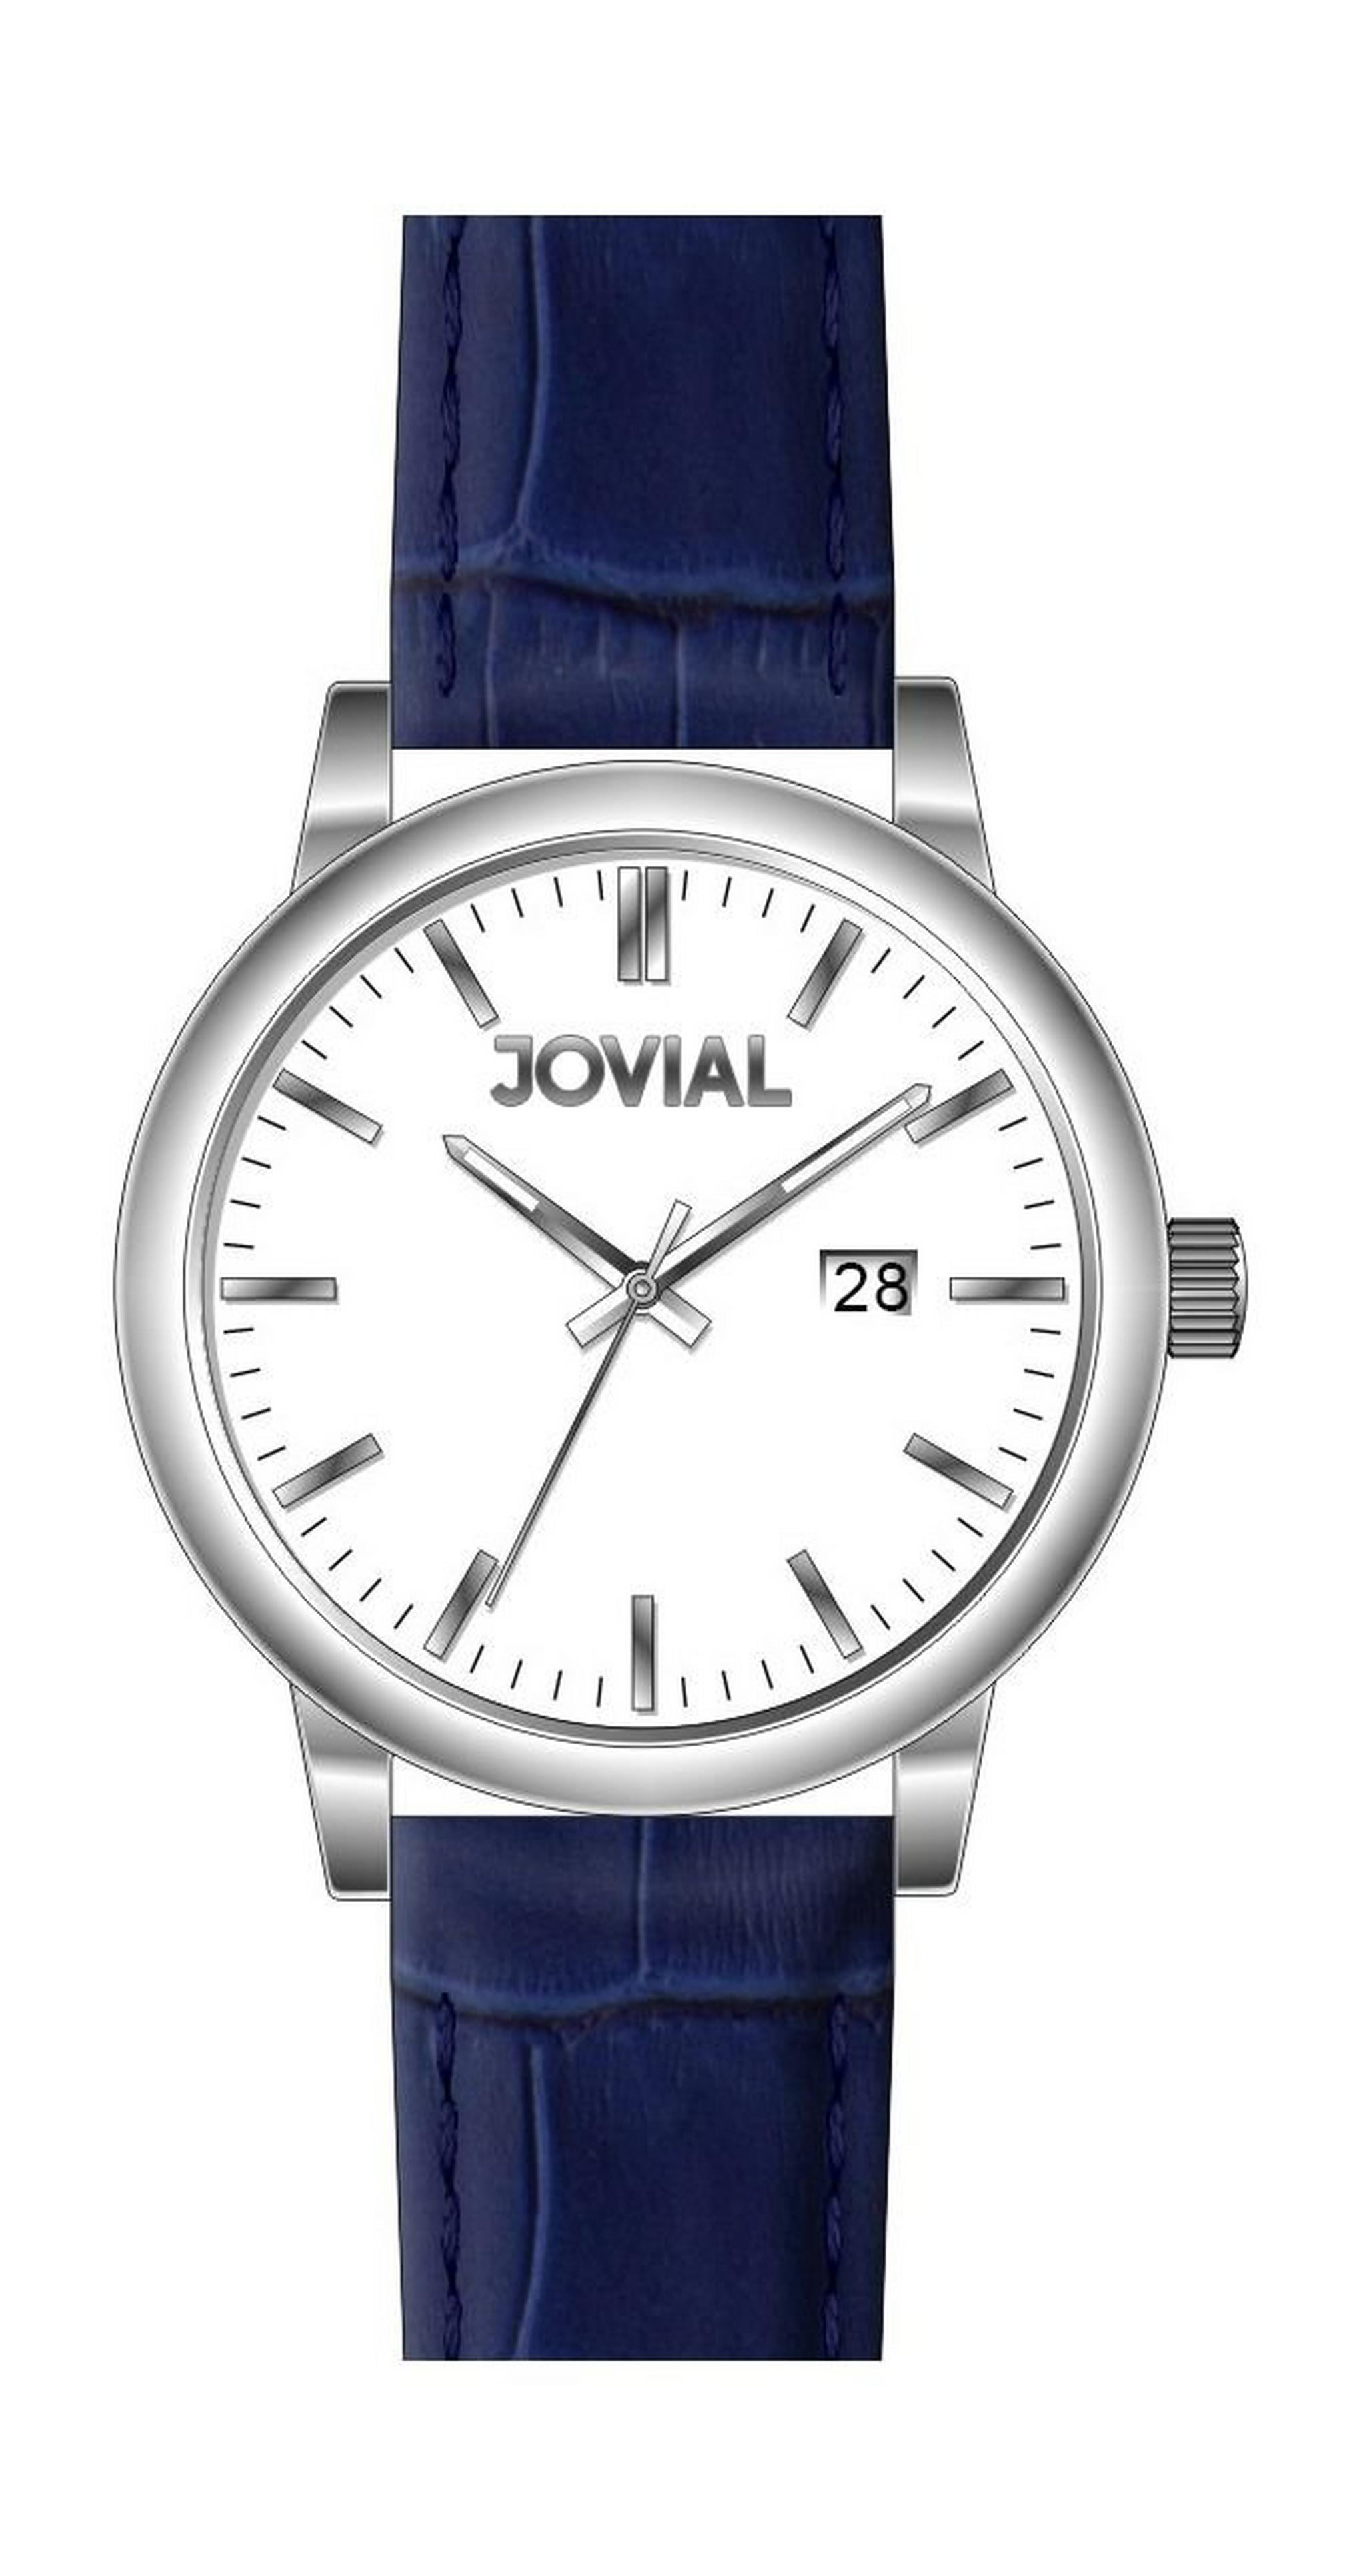 Jovial GS2008-51 Fashion Analog Gents Watch – Leather Strap – Blue